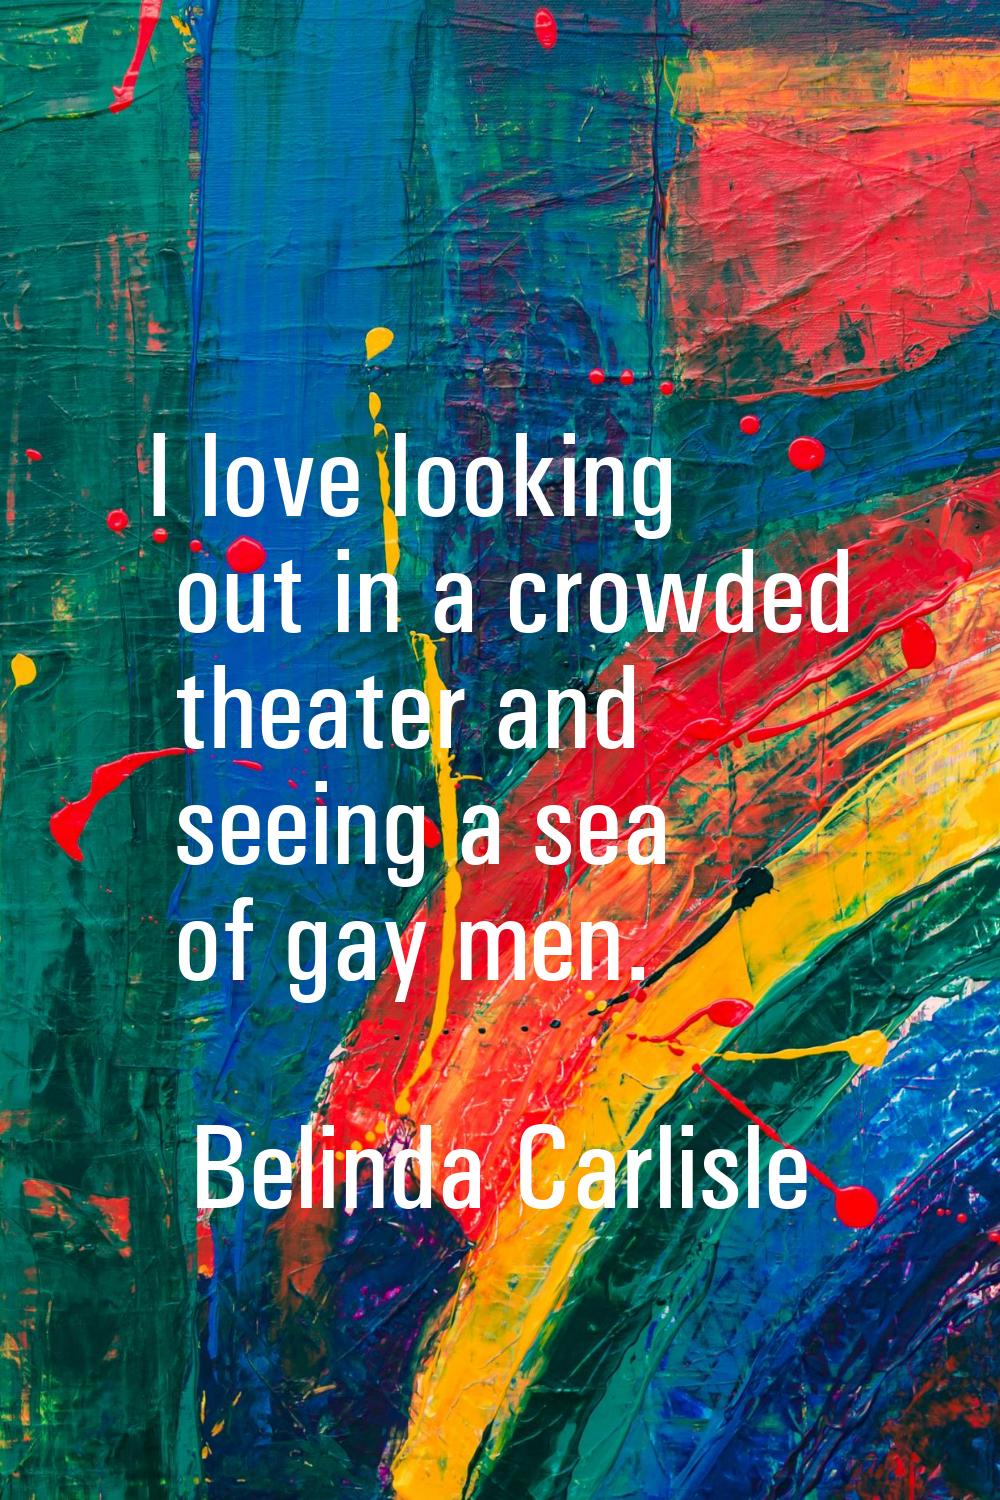 I love looking out in a crowded theater and seeing a sea of gay men.